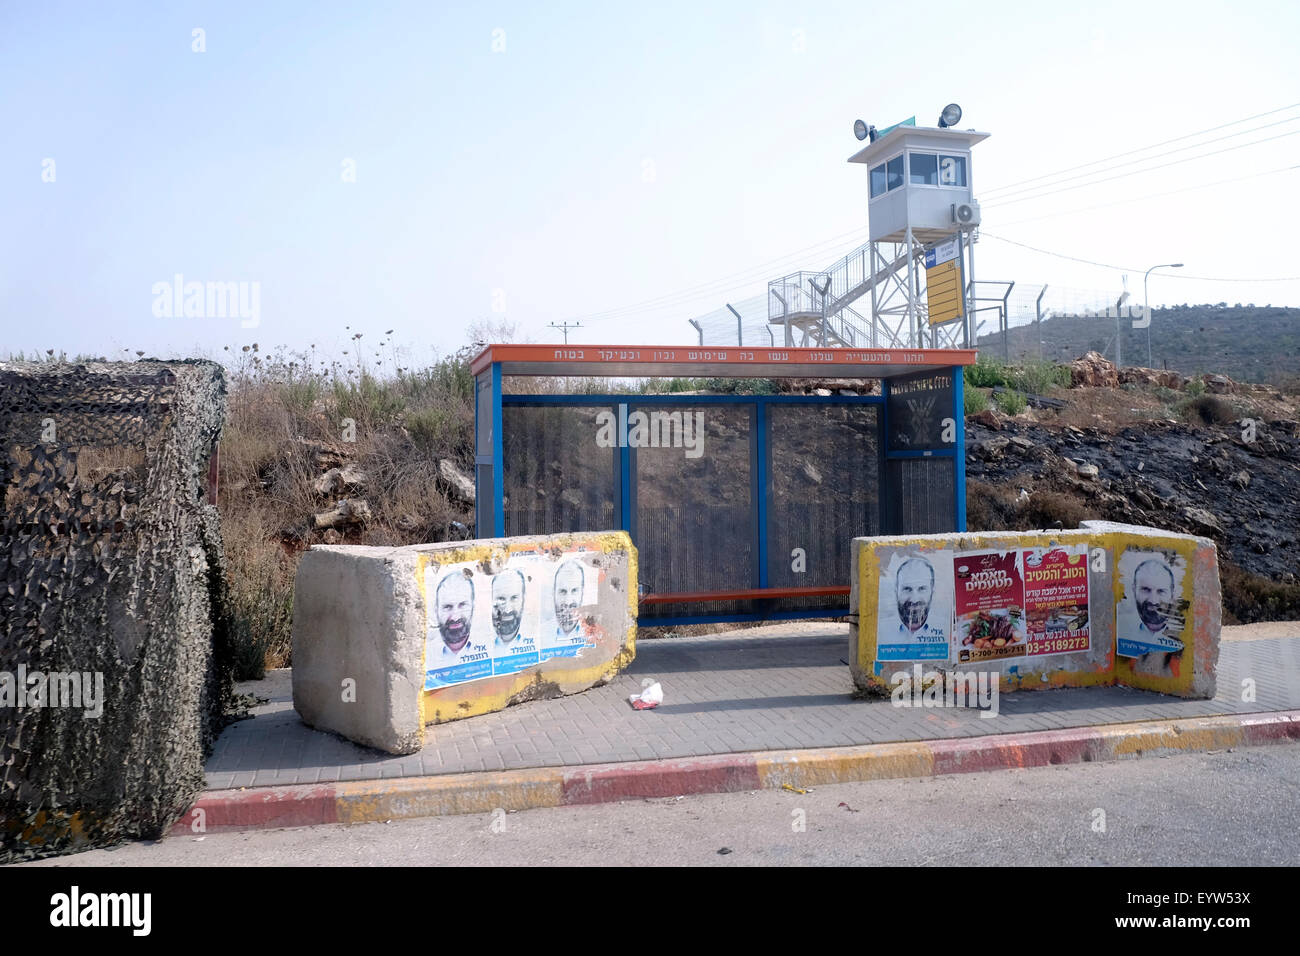 Bus station of Israeli line 161 near the Jewish settlement of Ofra in the West bank Israel Stock Photo